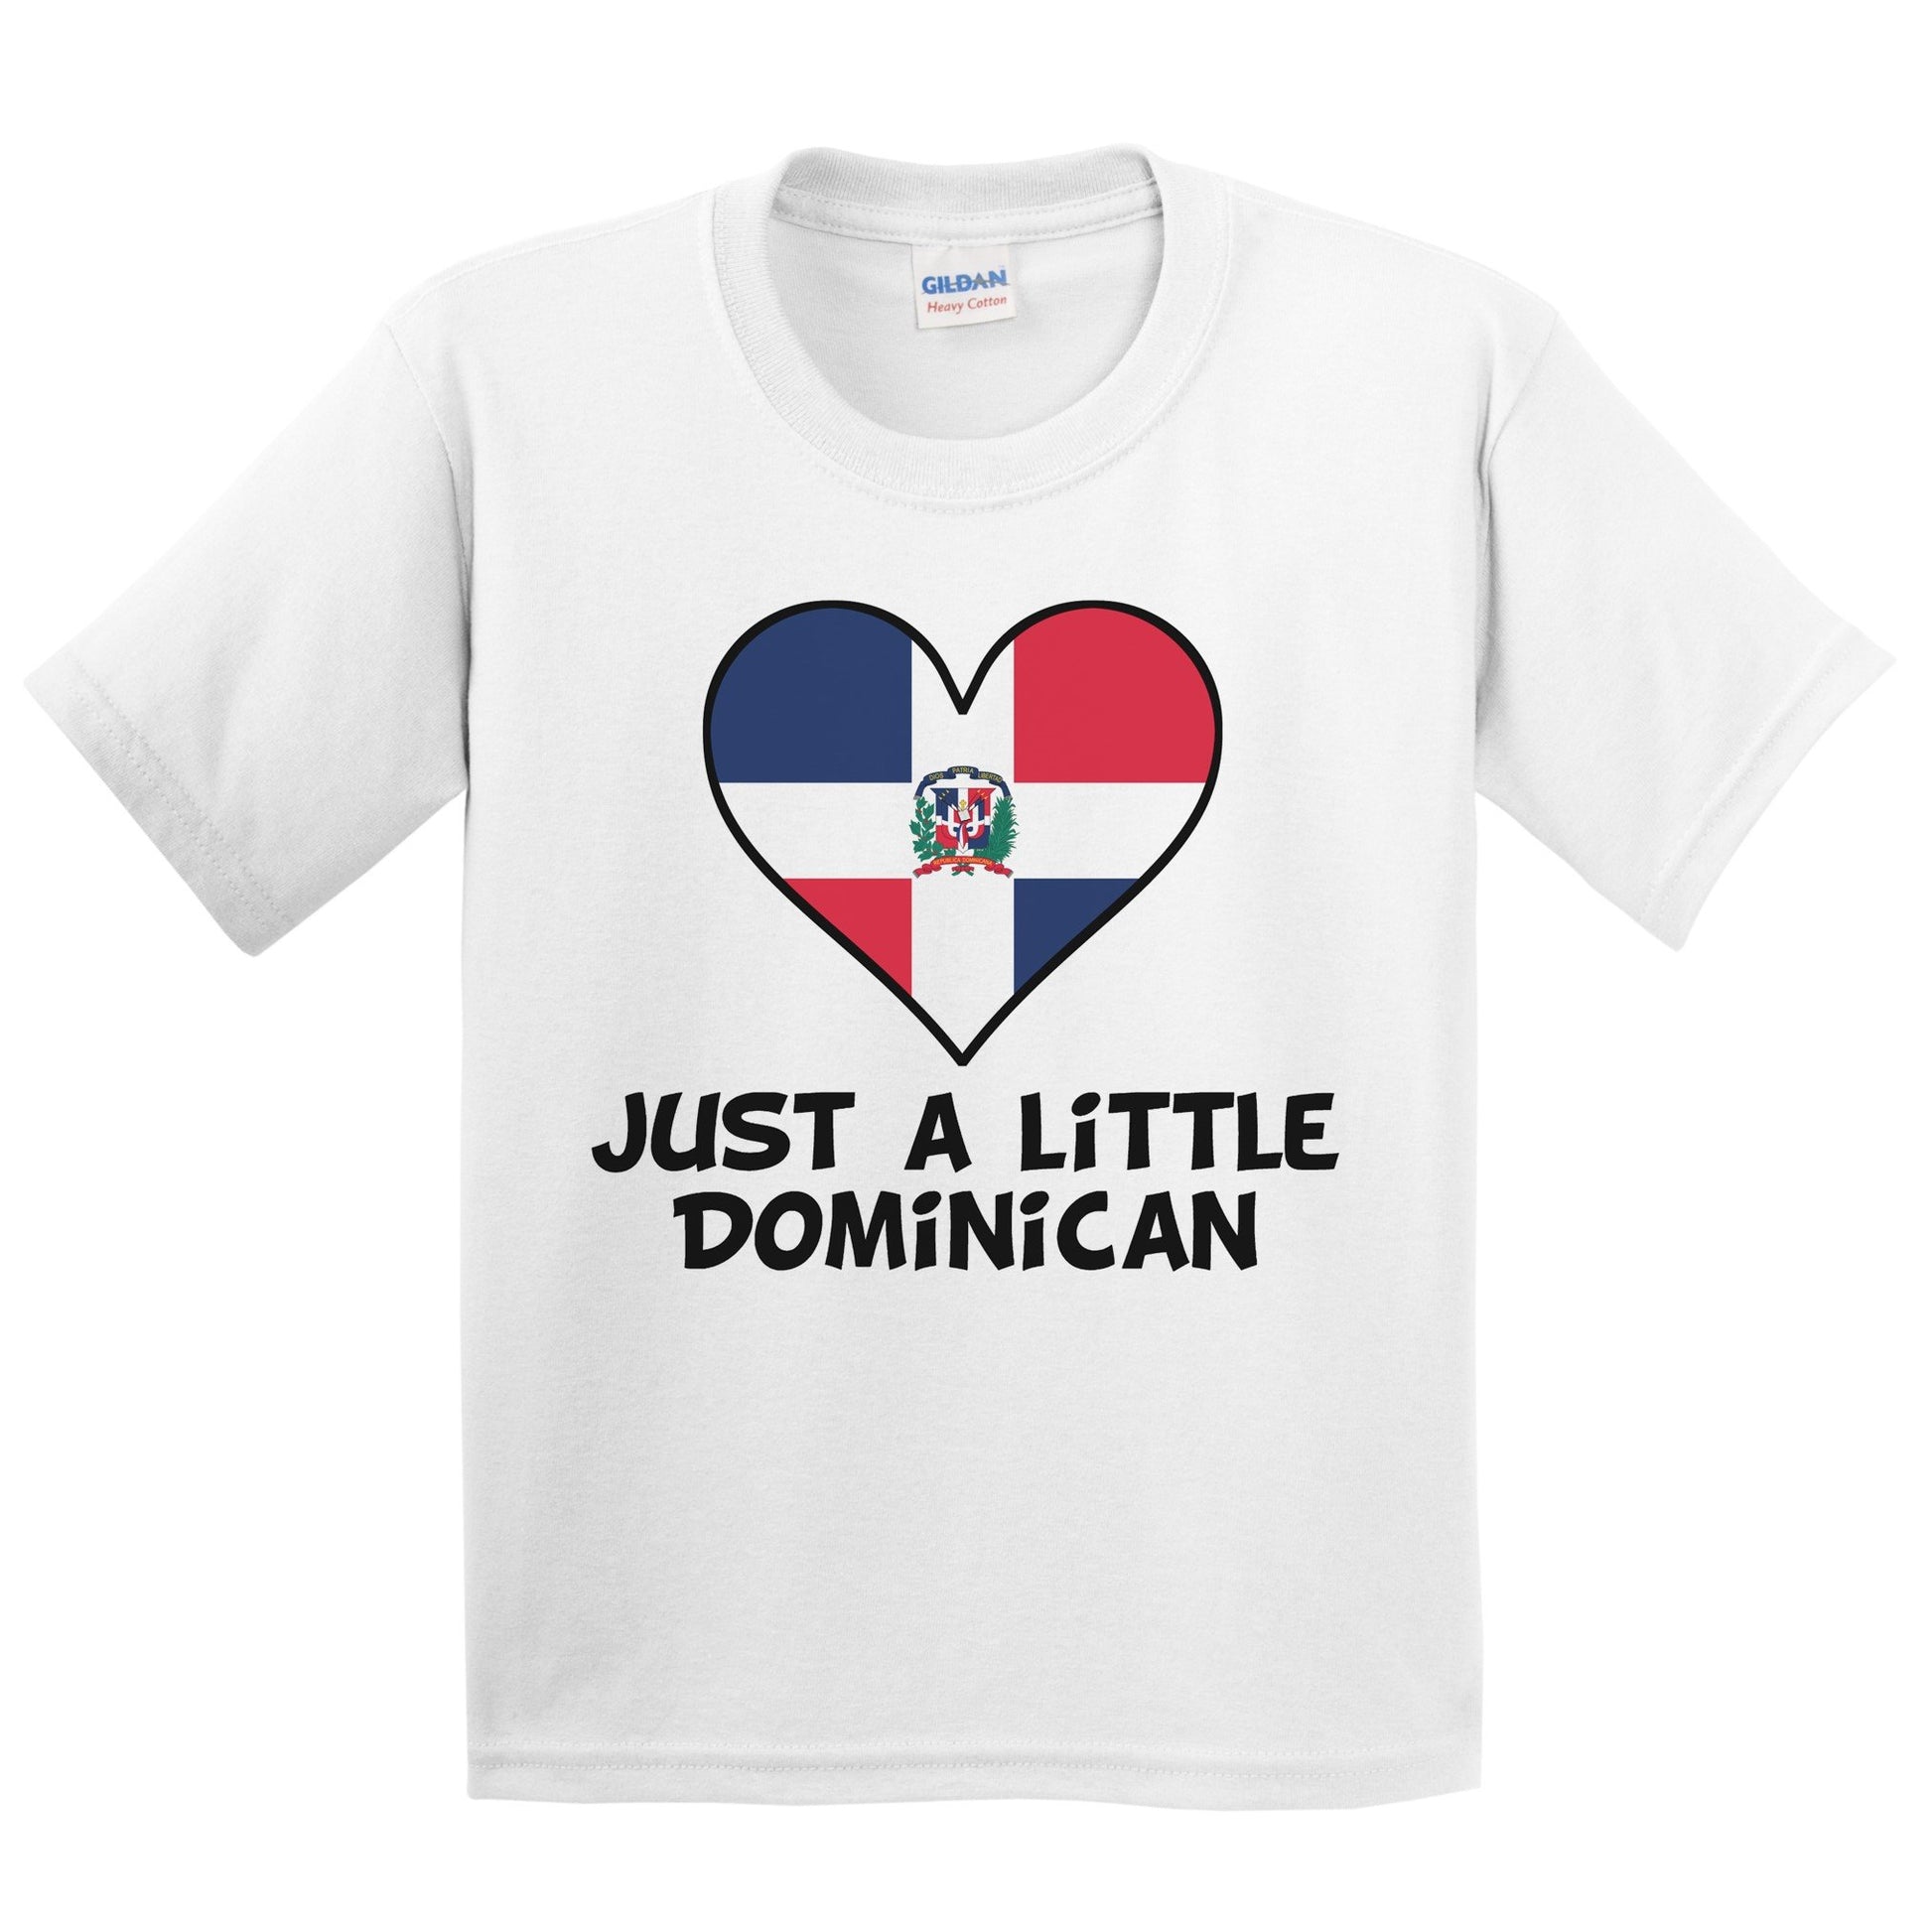 Just A Little Dominican T-Shirt - Funny Dominican Republic Flag Kids Youth Shirt